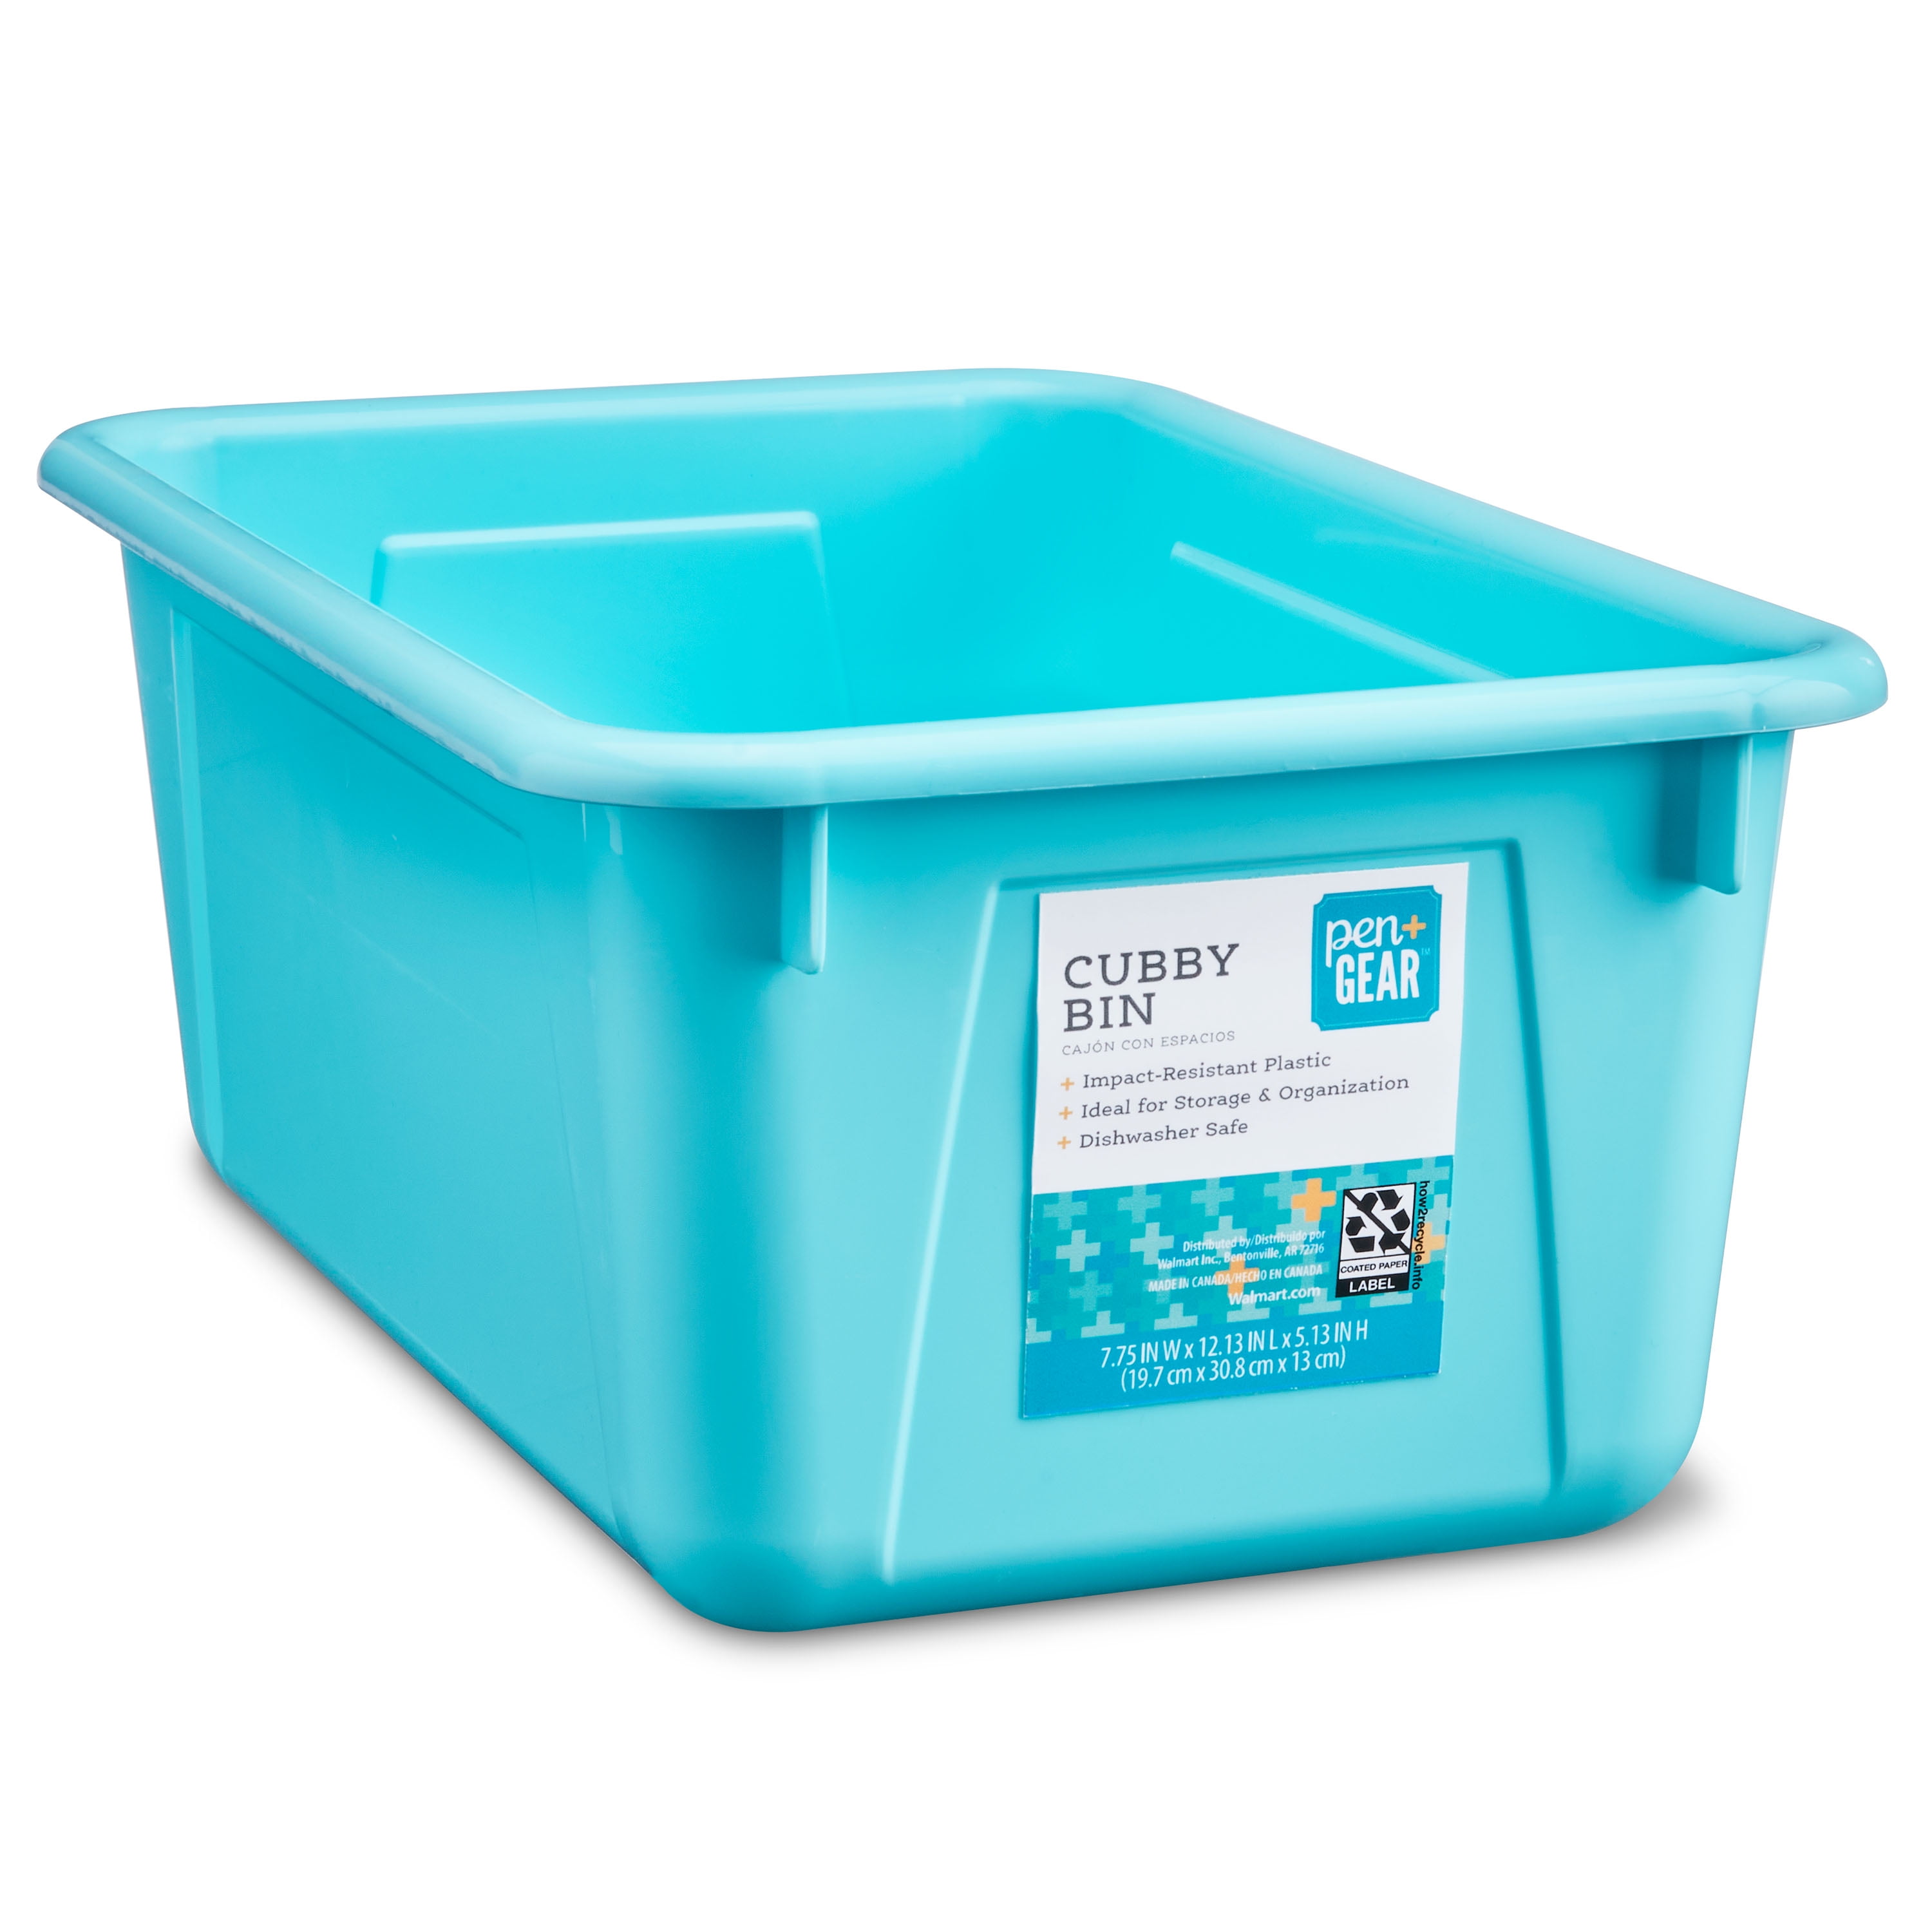 School Smart Translucent Cubby Bin, Small, 7-7/8 x 12-1/4 x 5-3/8 Inches, Candy Teal, Pack of 5, Blue